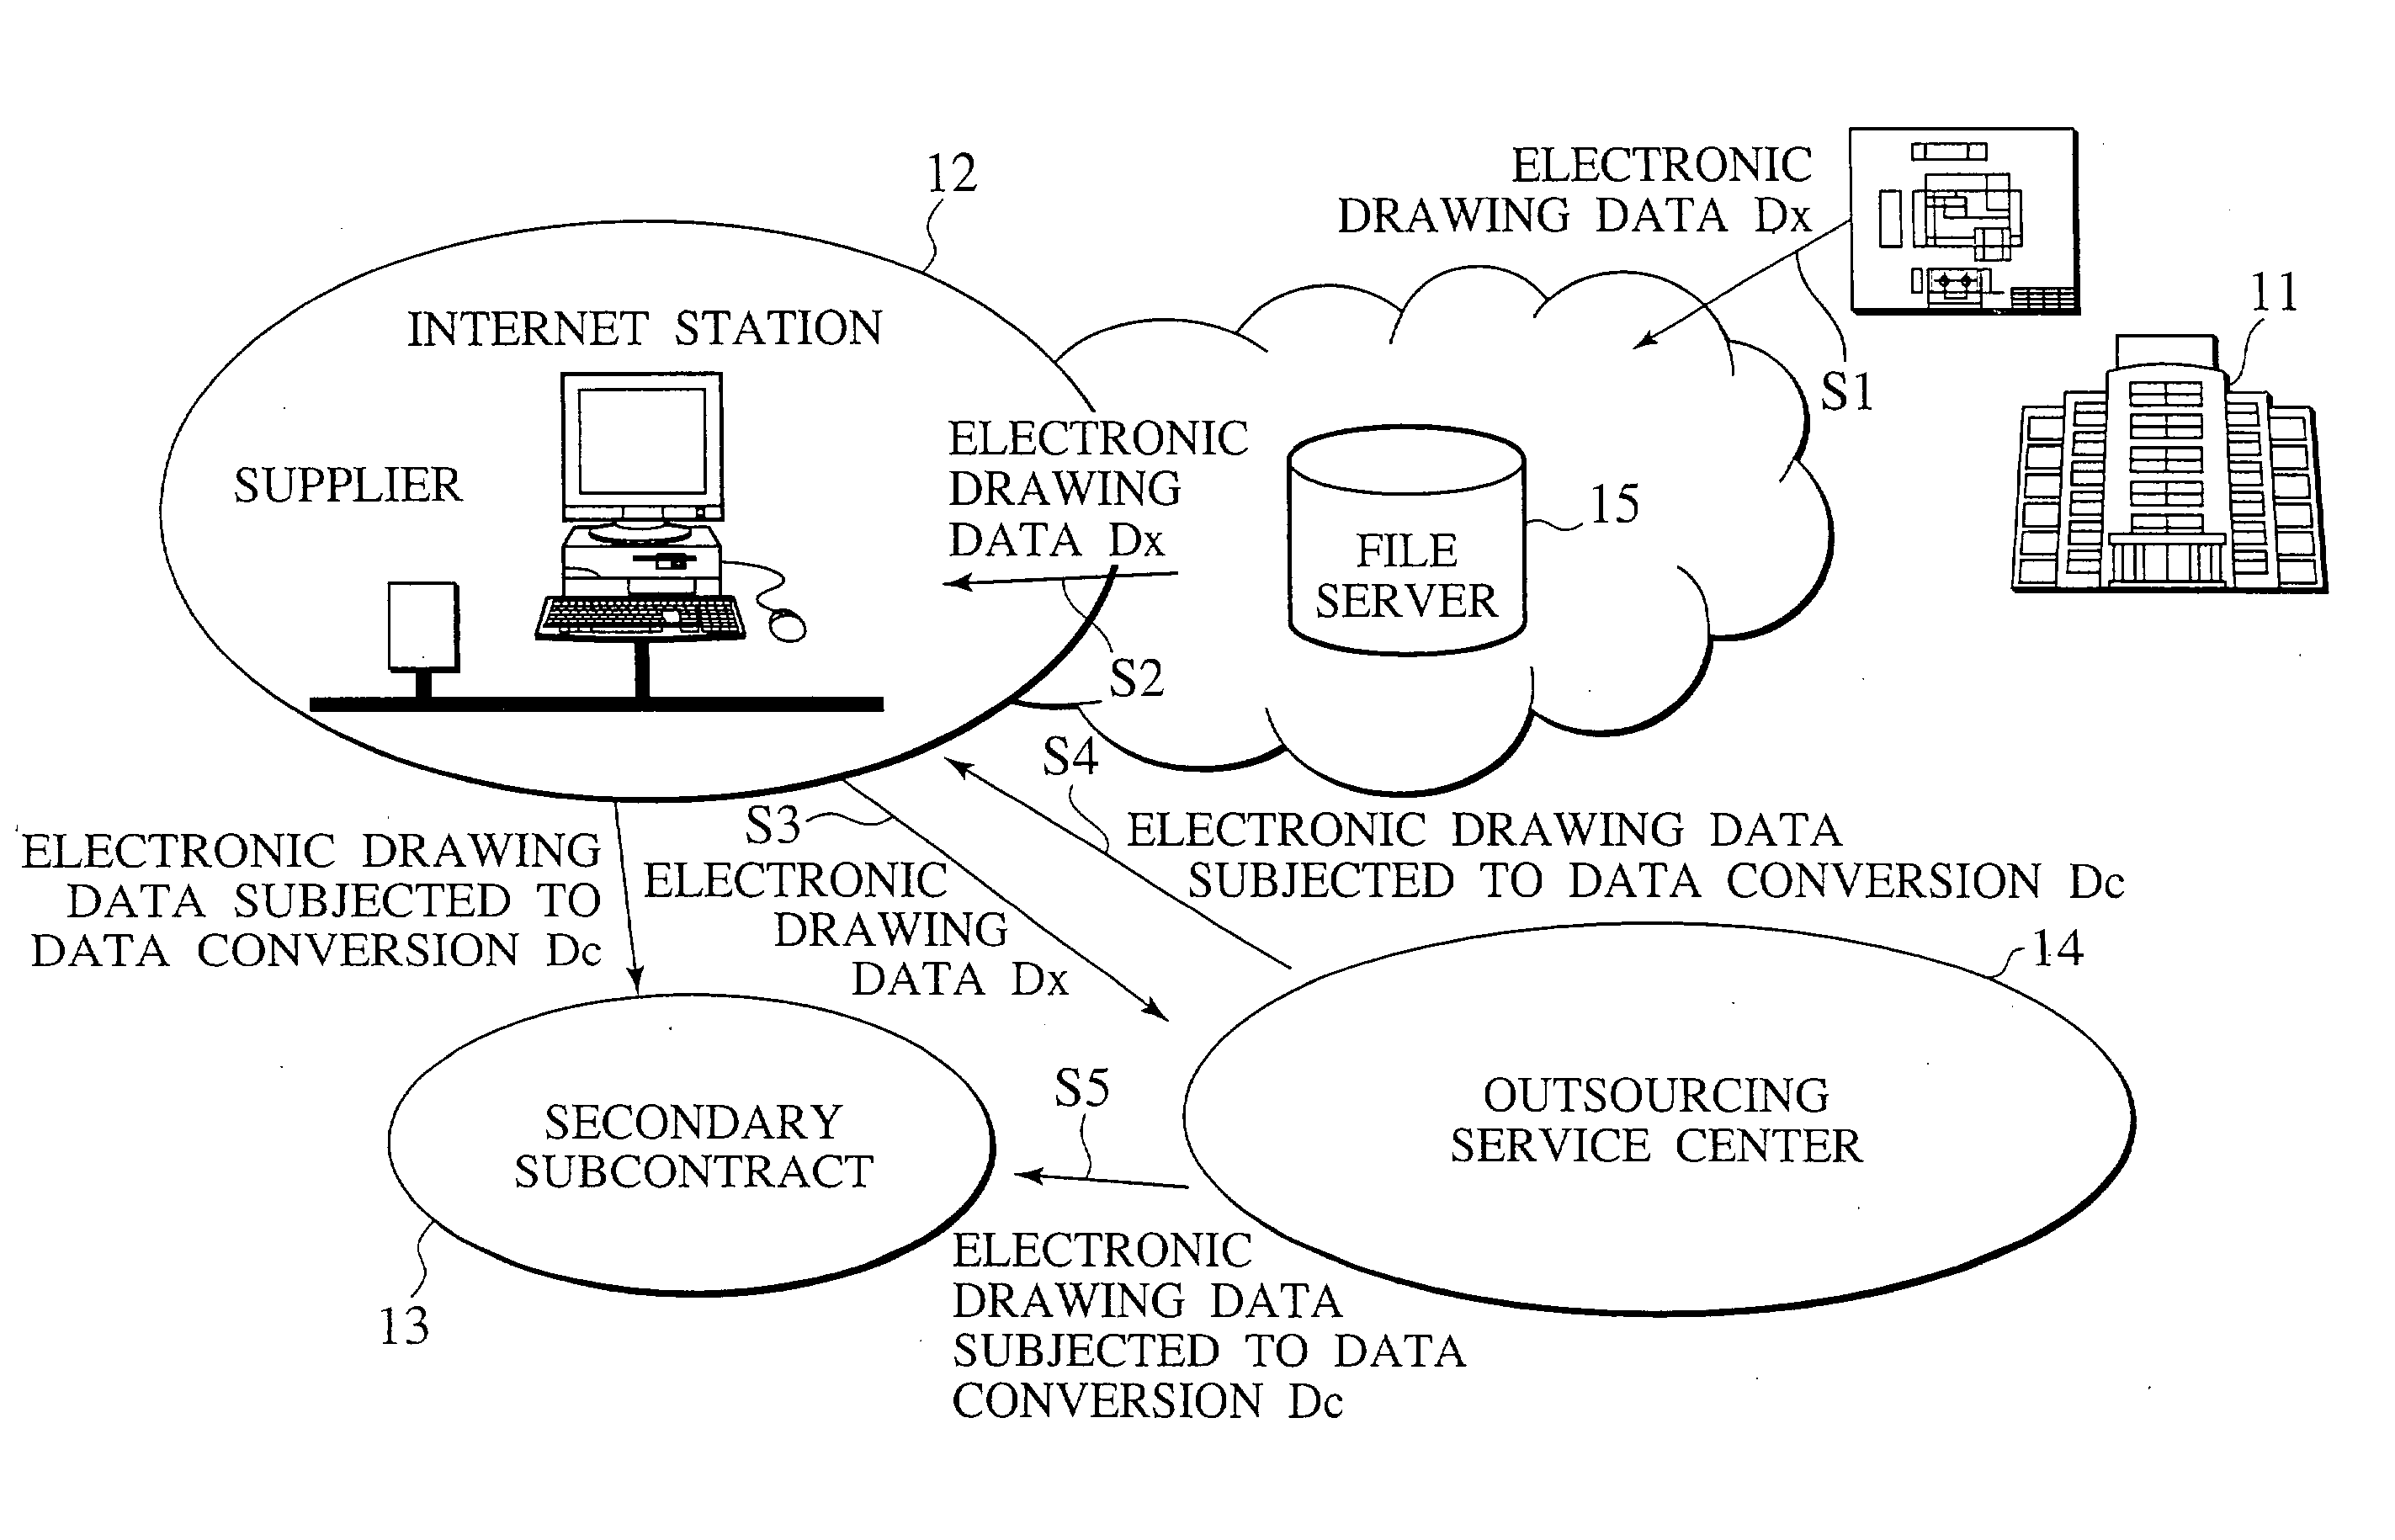 Outsourcing service apparatus concerning electronic drawing data